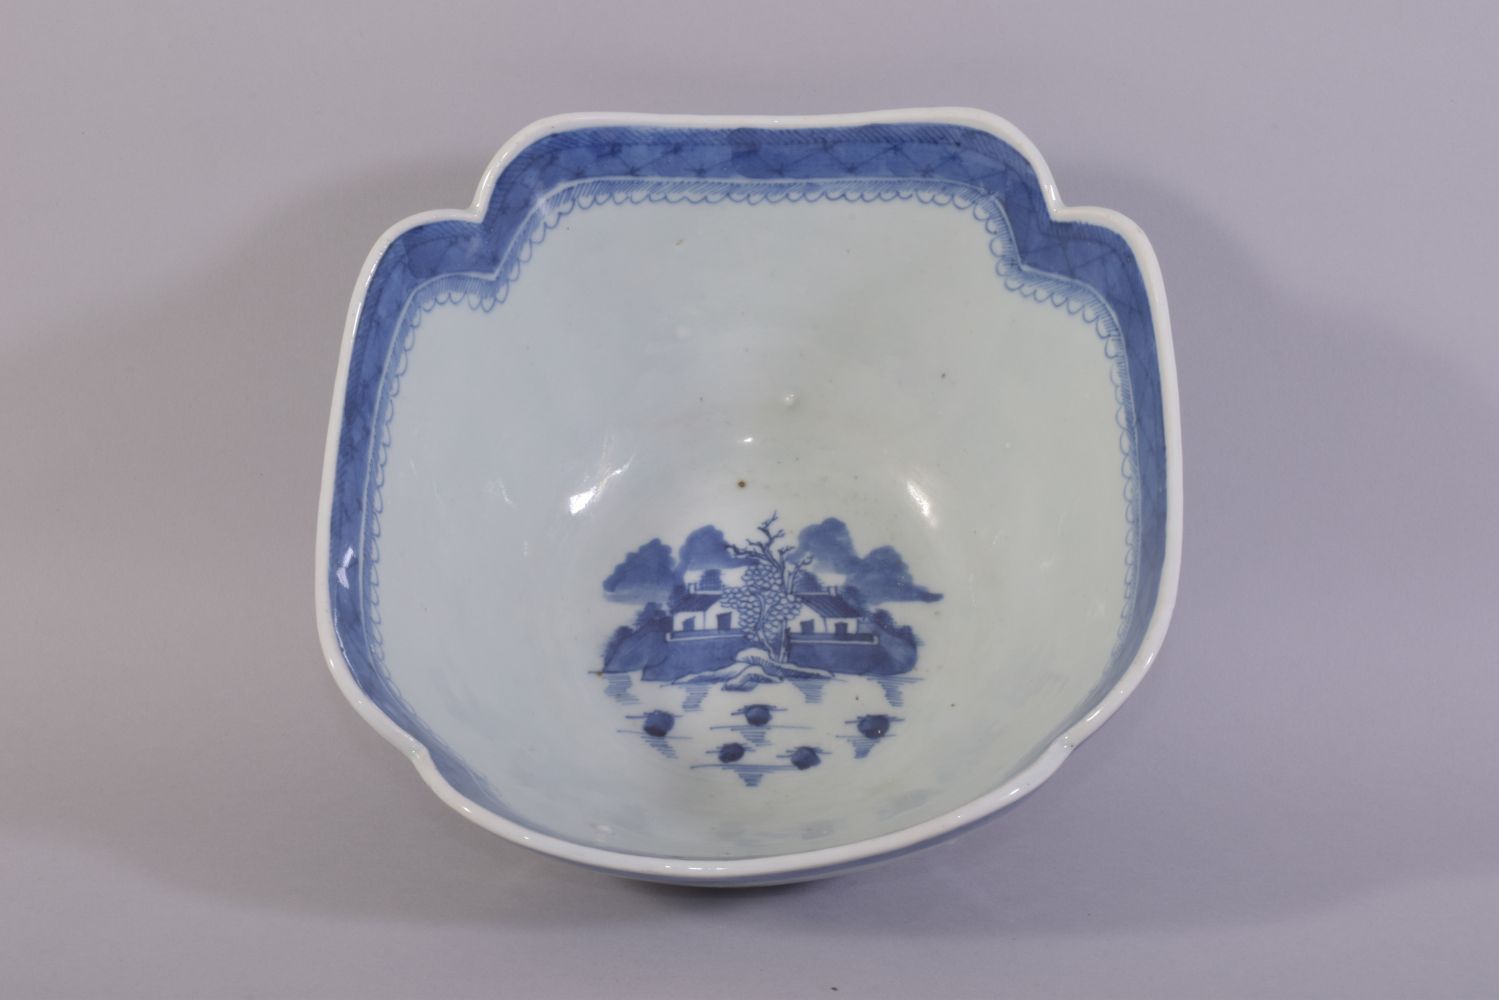 A CHINESE BLUE AND WHITE PORCELAIN BOWL, decorated with a landscape including buildings, boats and - Image 5 of 6